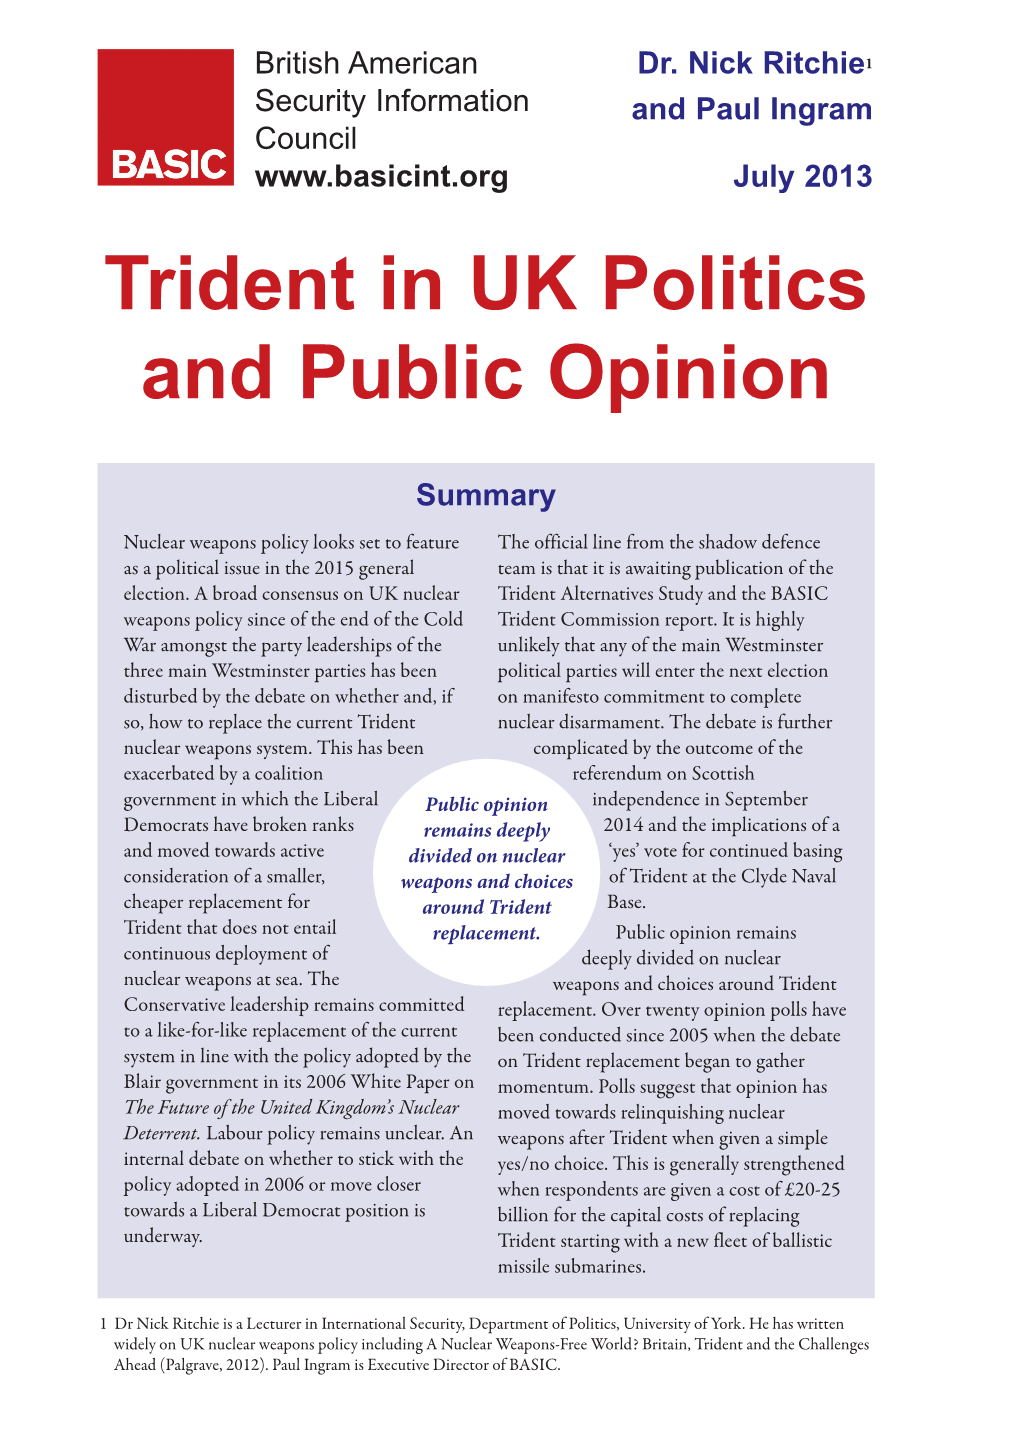 Trident in UK Politics and Public Opinion